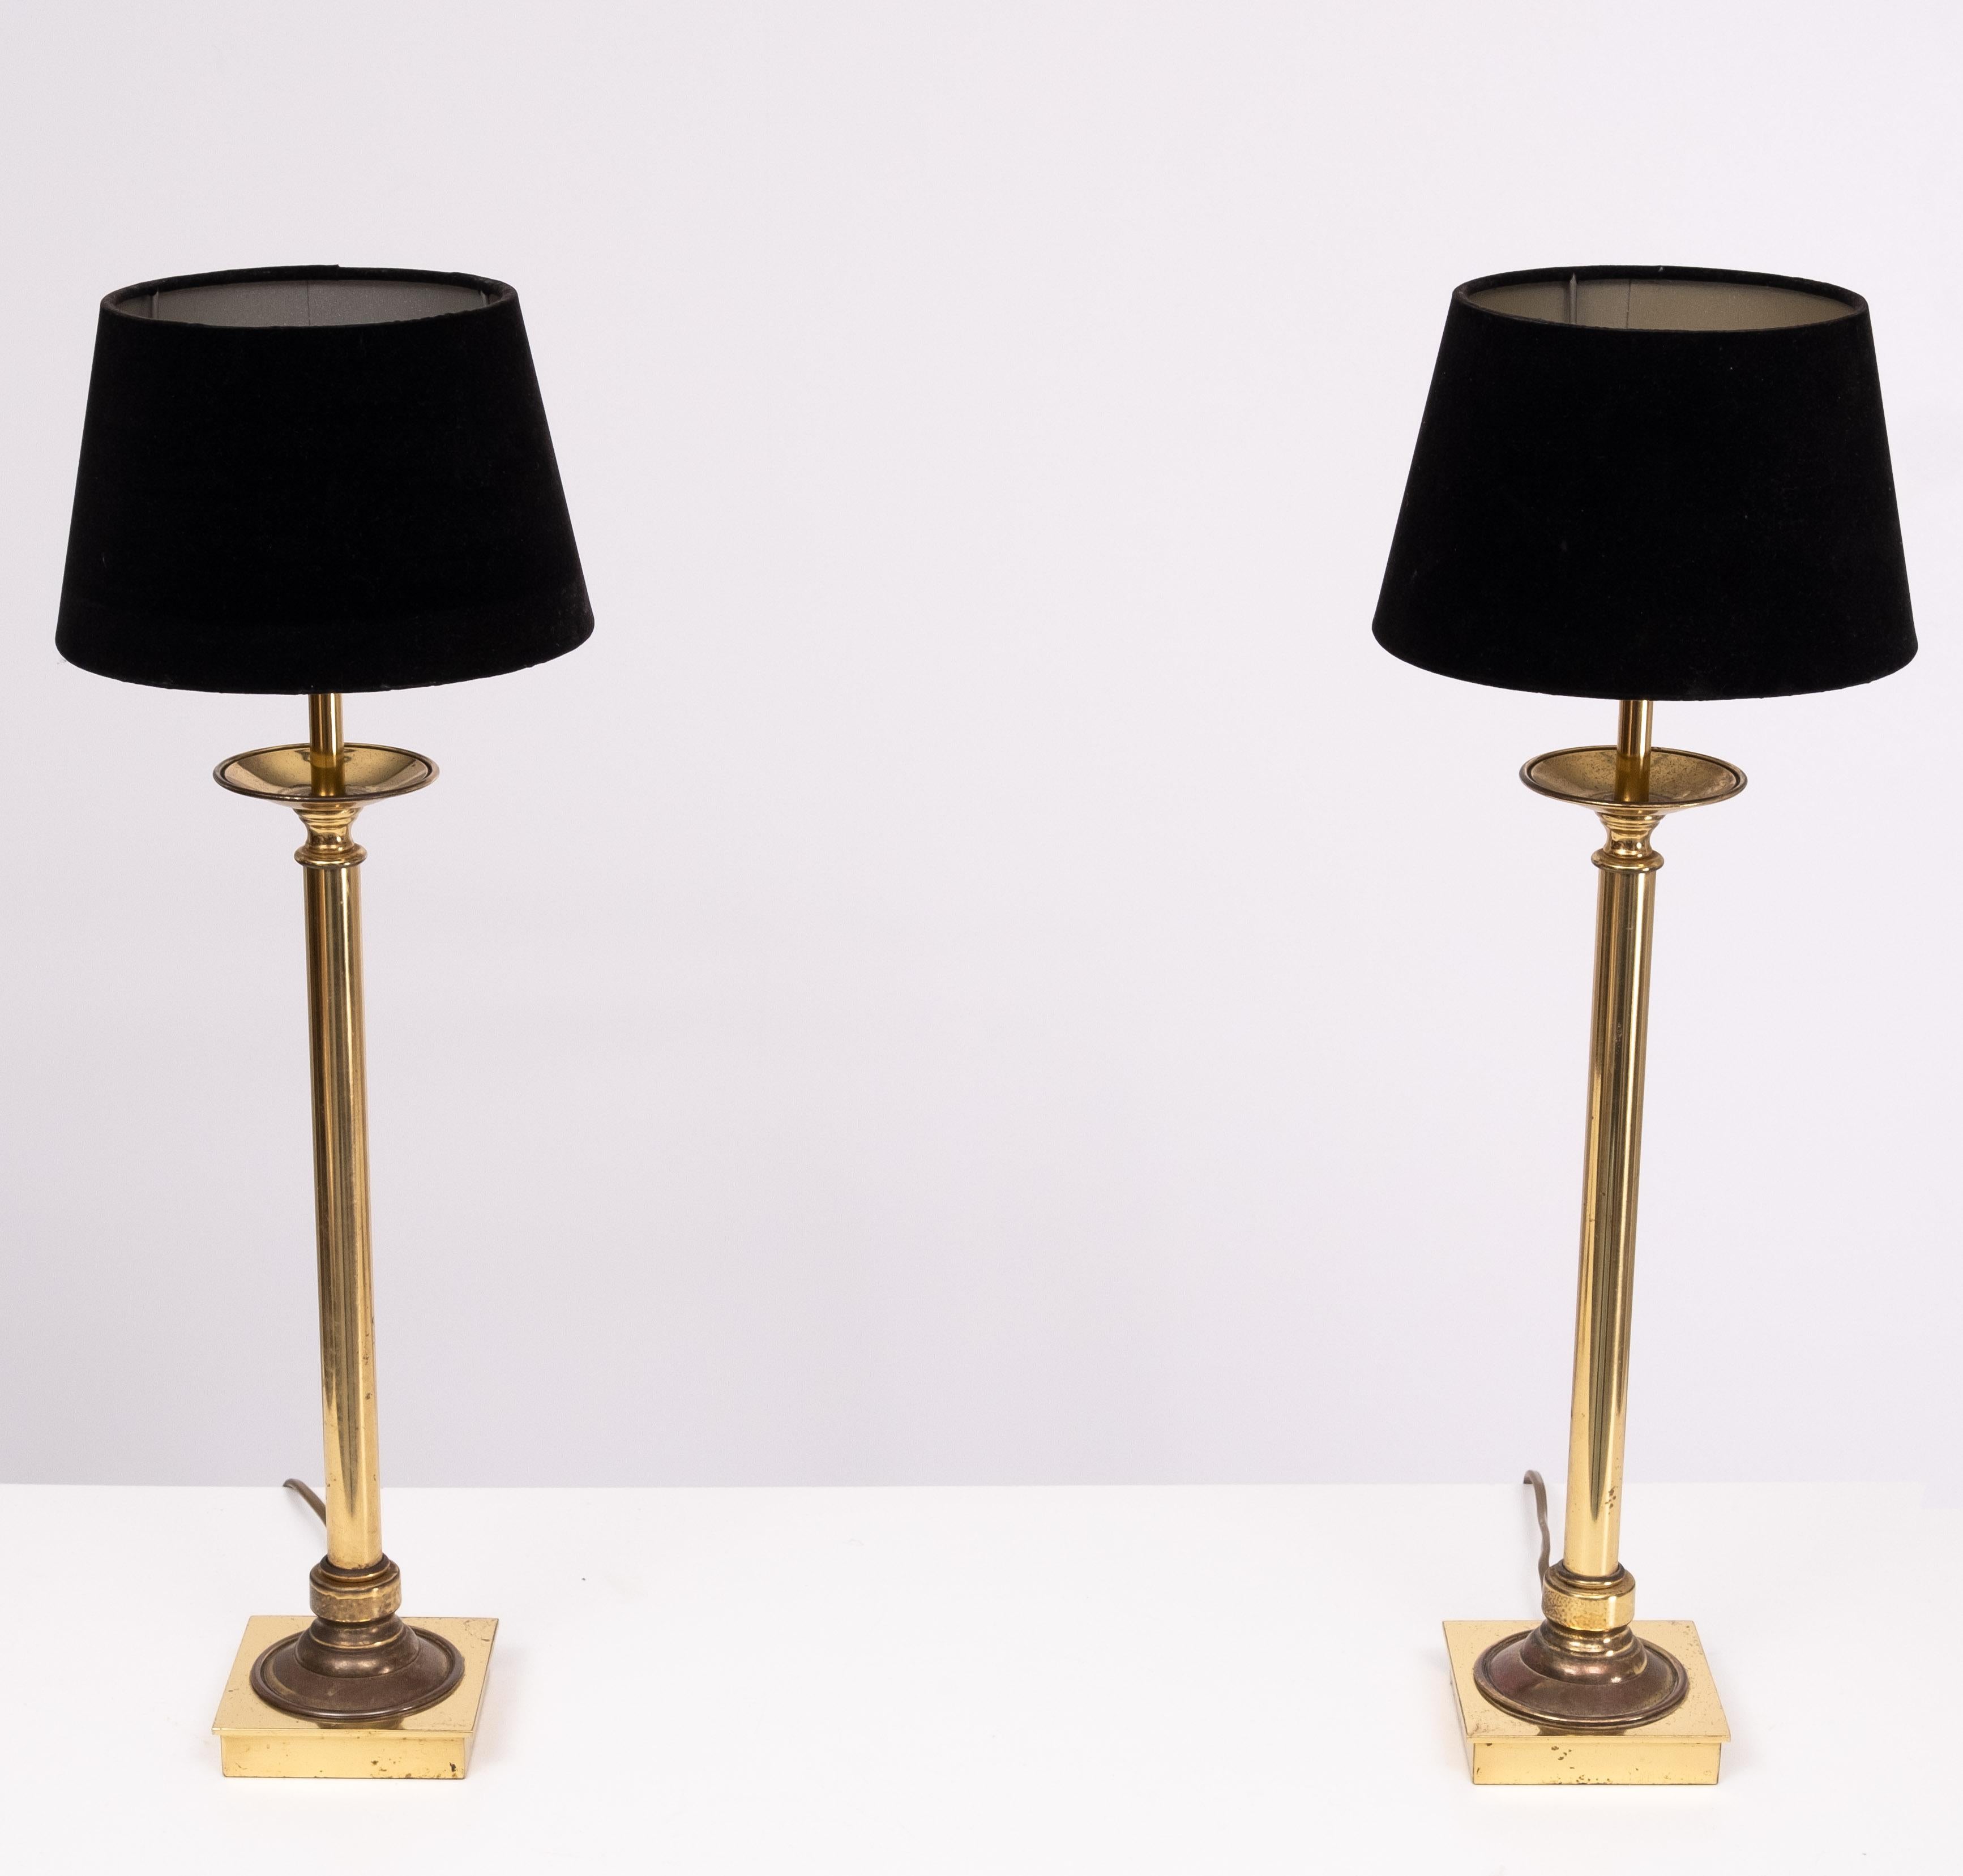 High Classic Brass Table lamps  1970s Germany  In Good Condition For Sale In Den Haag, NL